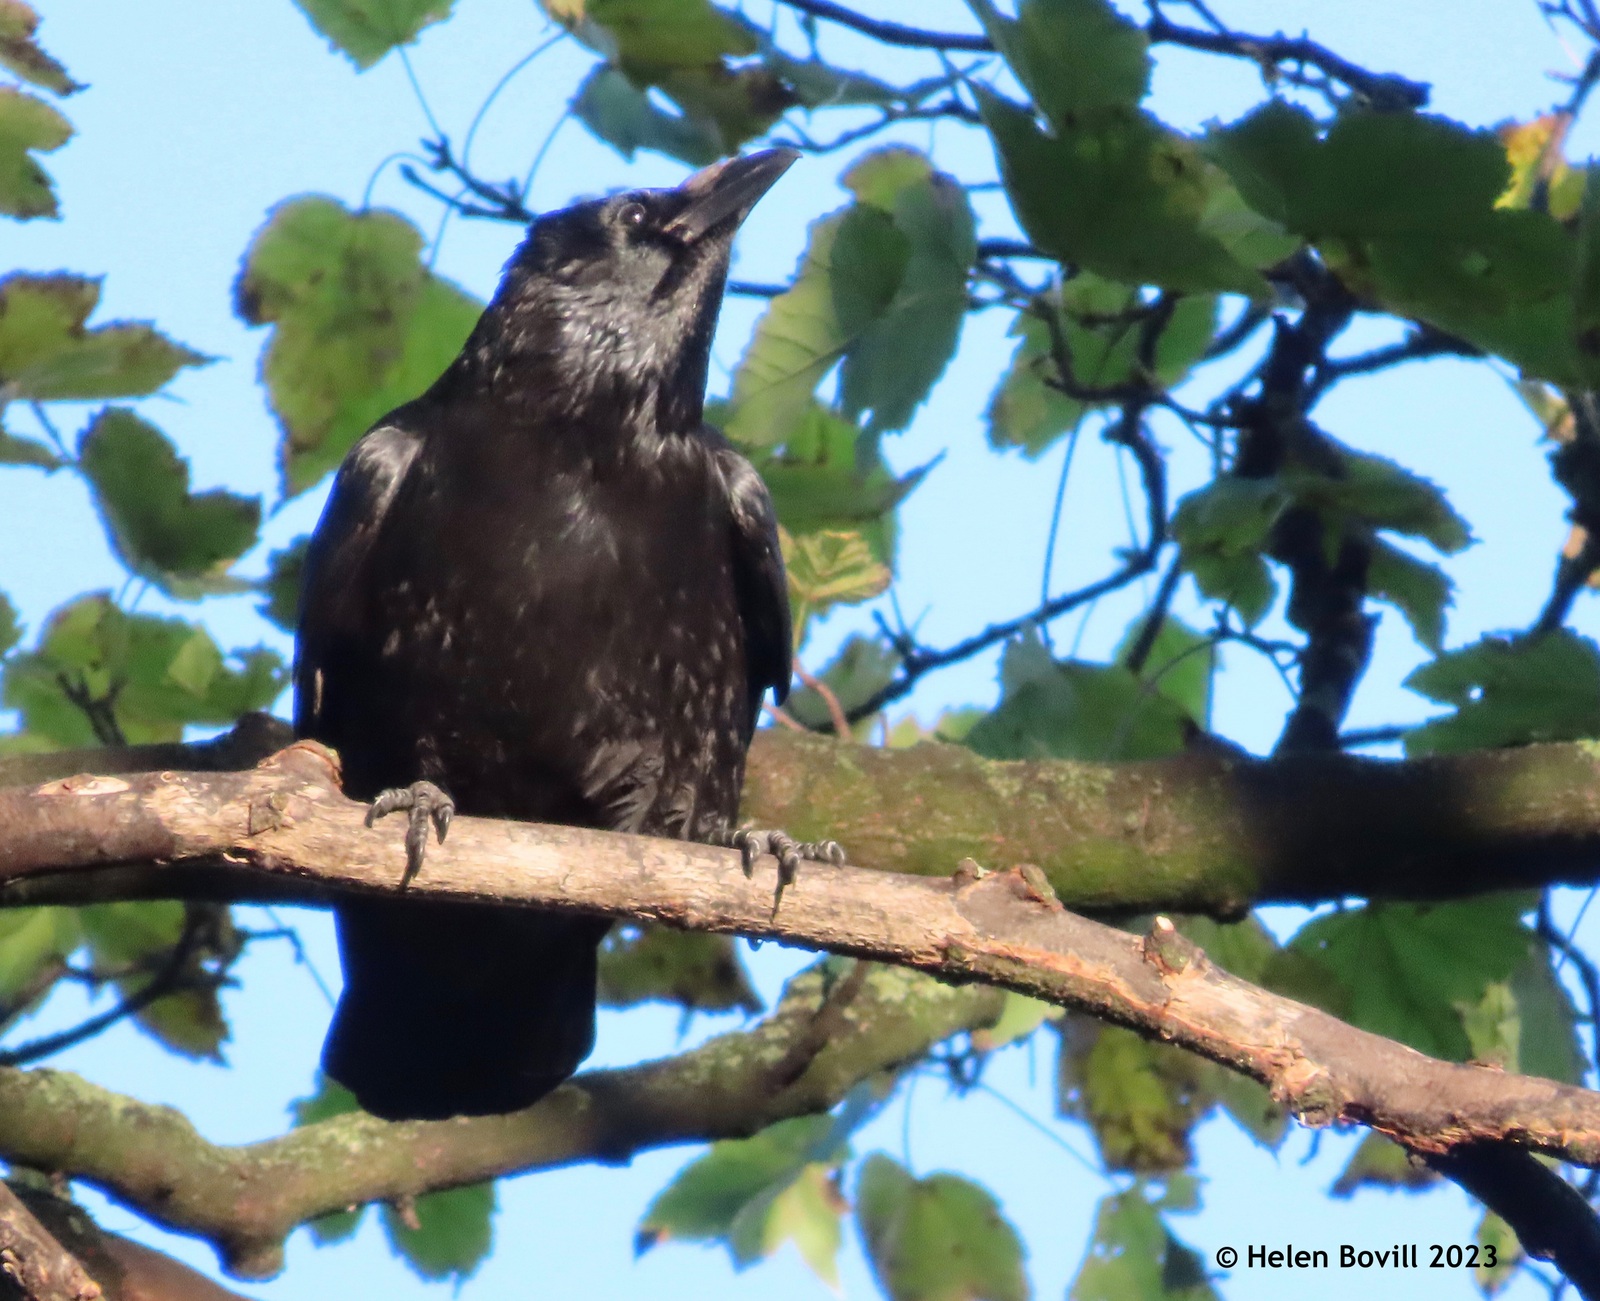 A carrion crow high up in the branches